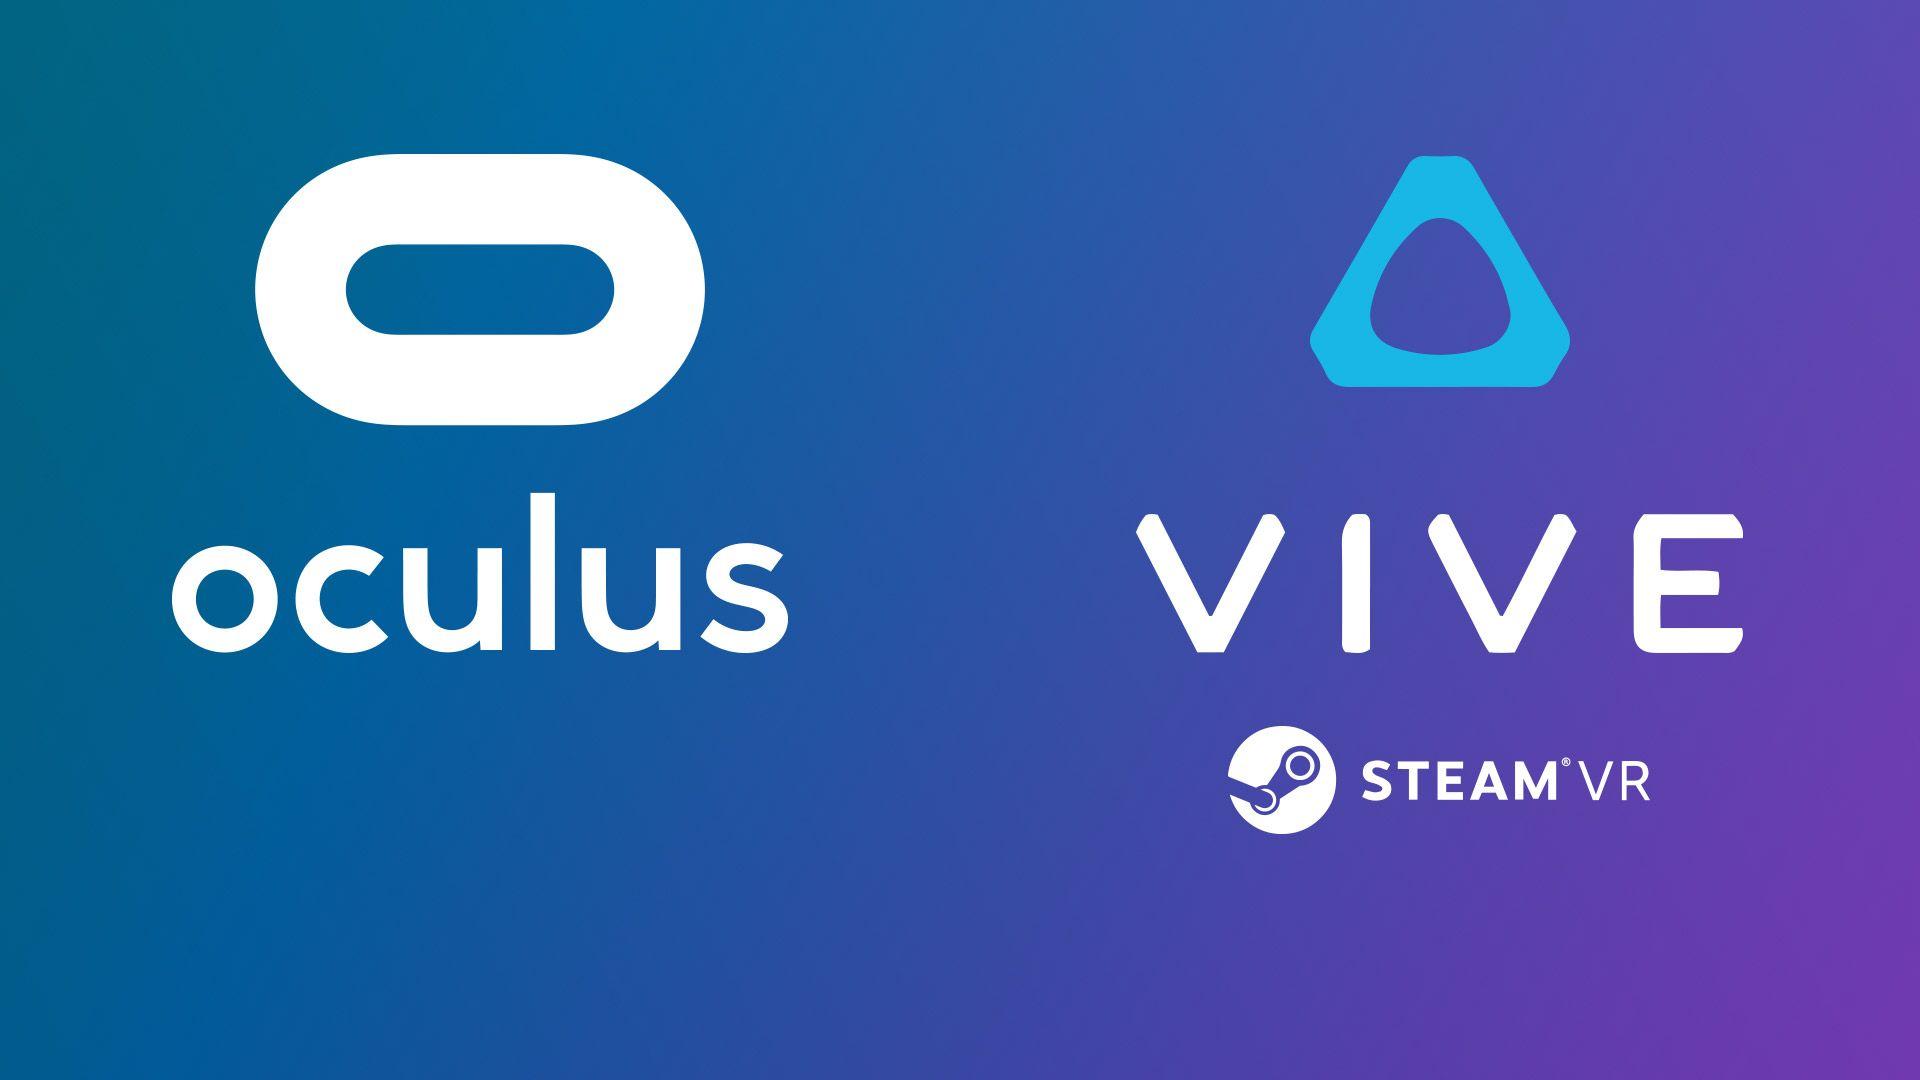 Vive HTC Logo - Steam Survey: HTC Vive Neck and Neck with Oculus Rift After ...